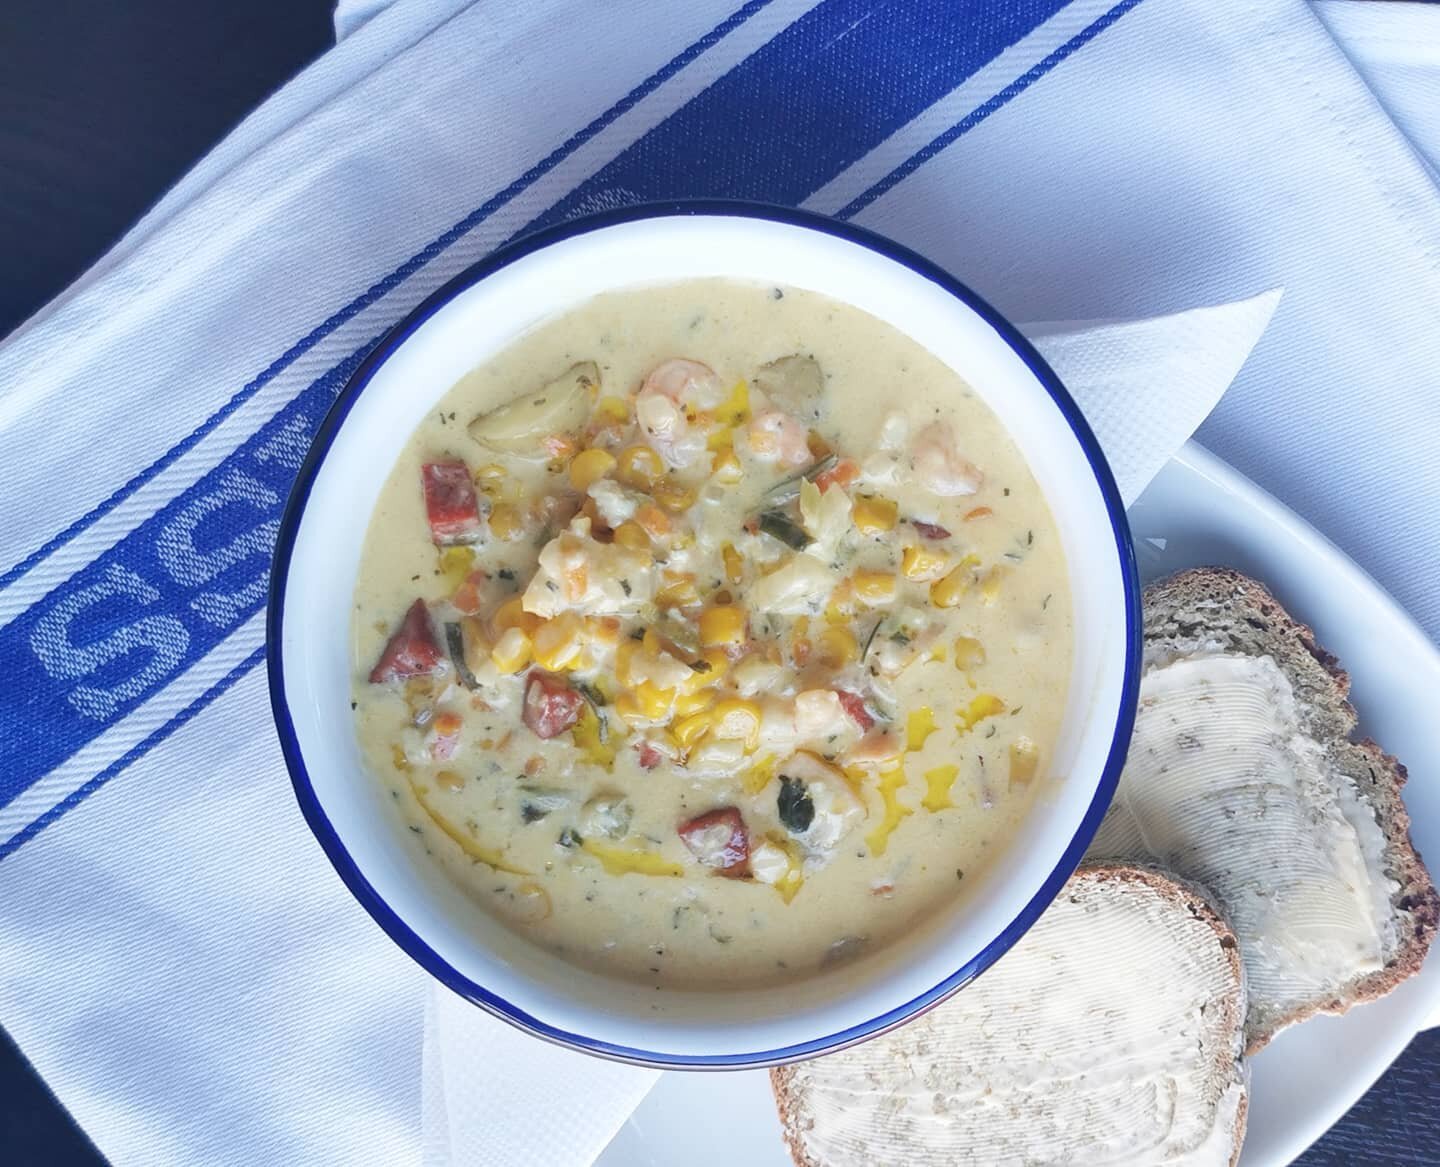 Our Donegal Chowder is really quite special, made with Donegal prime produce, corndale chorizo and Uncles Eddie's famous wheaten bread 👌

#derry #derryfood #visitireland #visitni #visitderry #collon #thecollonbar #pubfood #donegalprime #corndale #ch